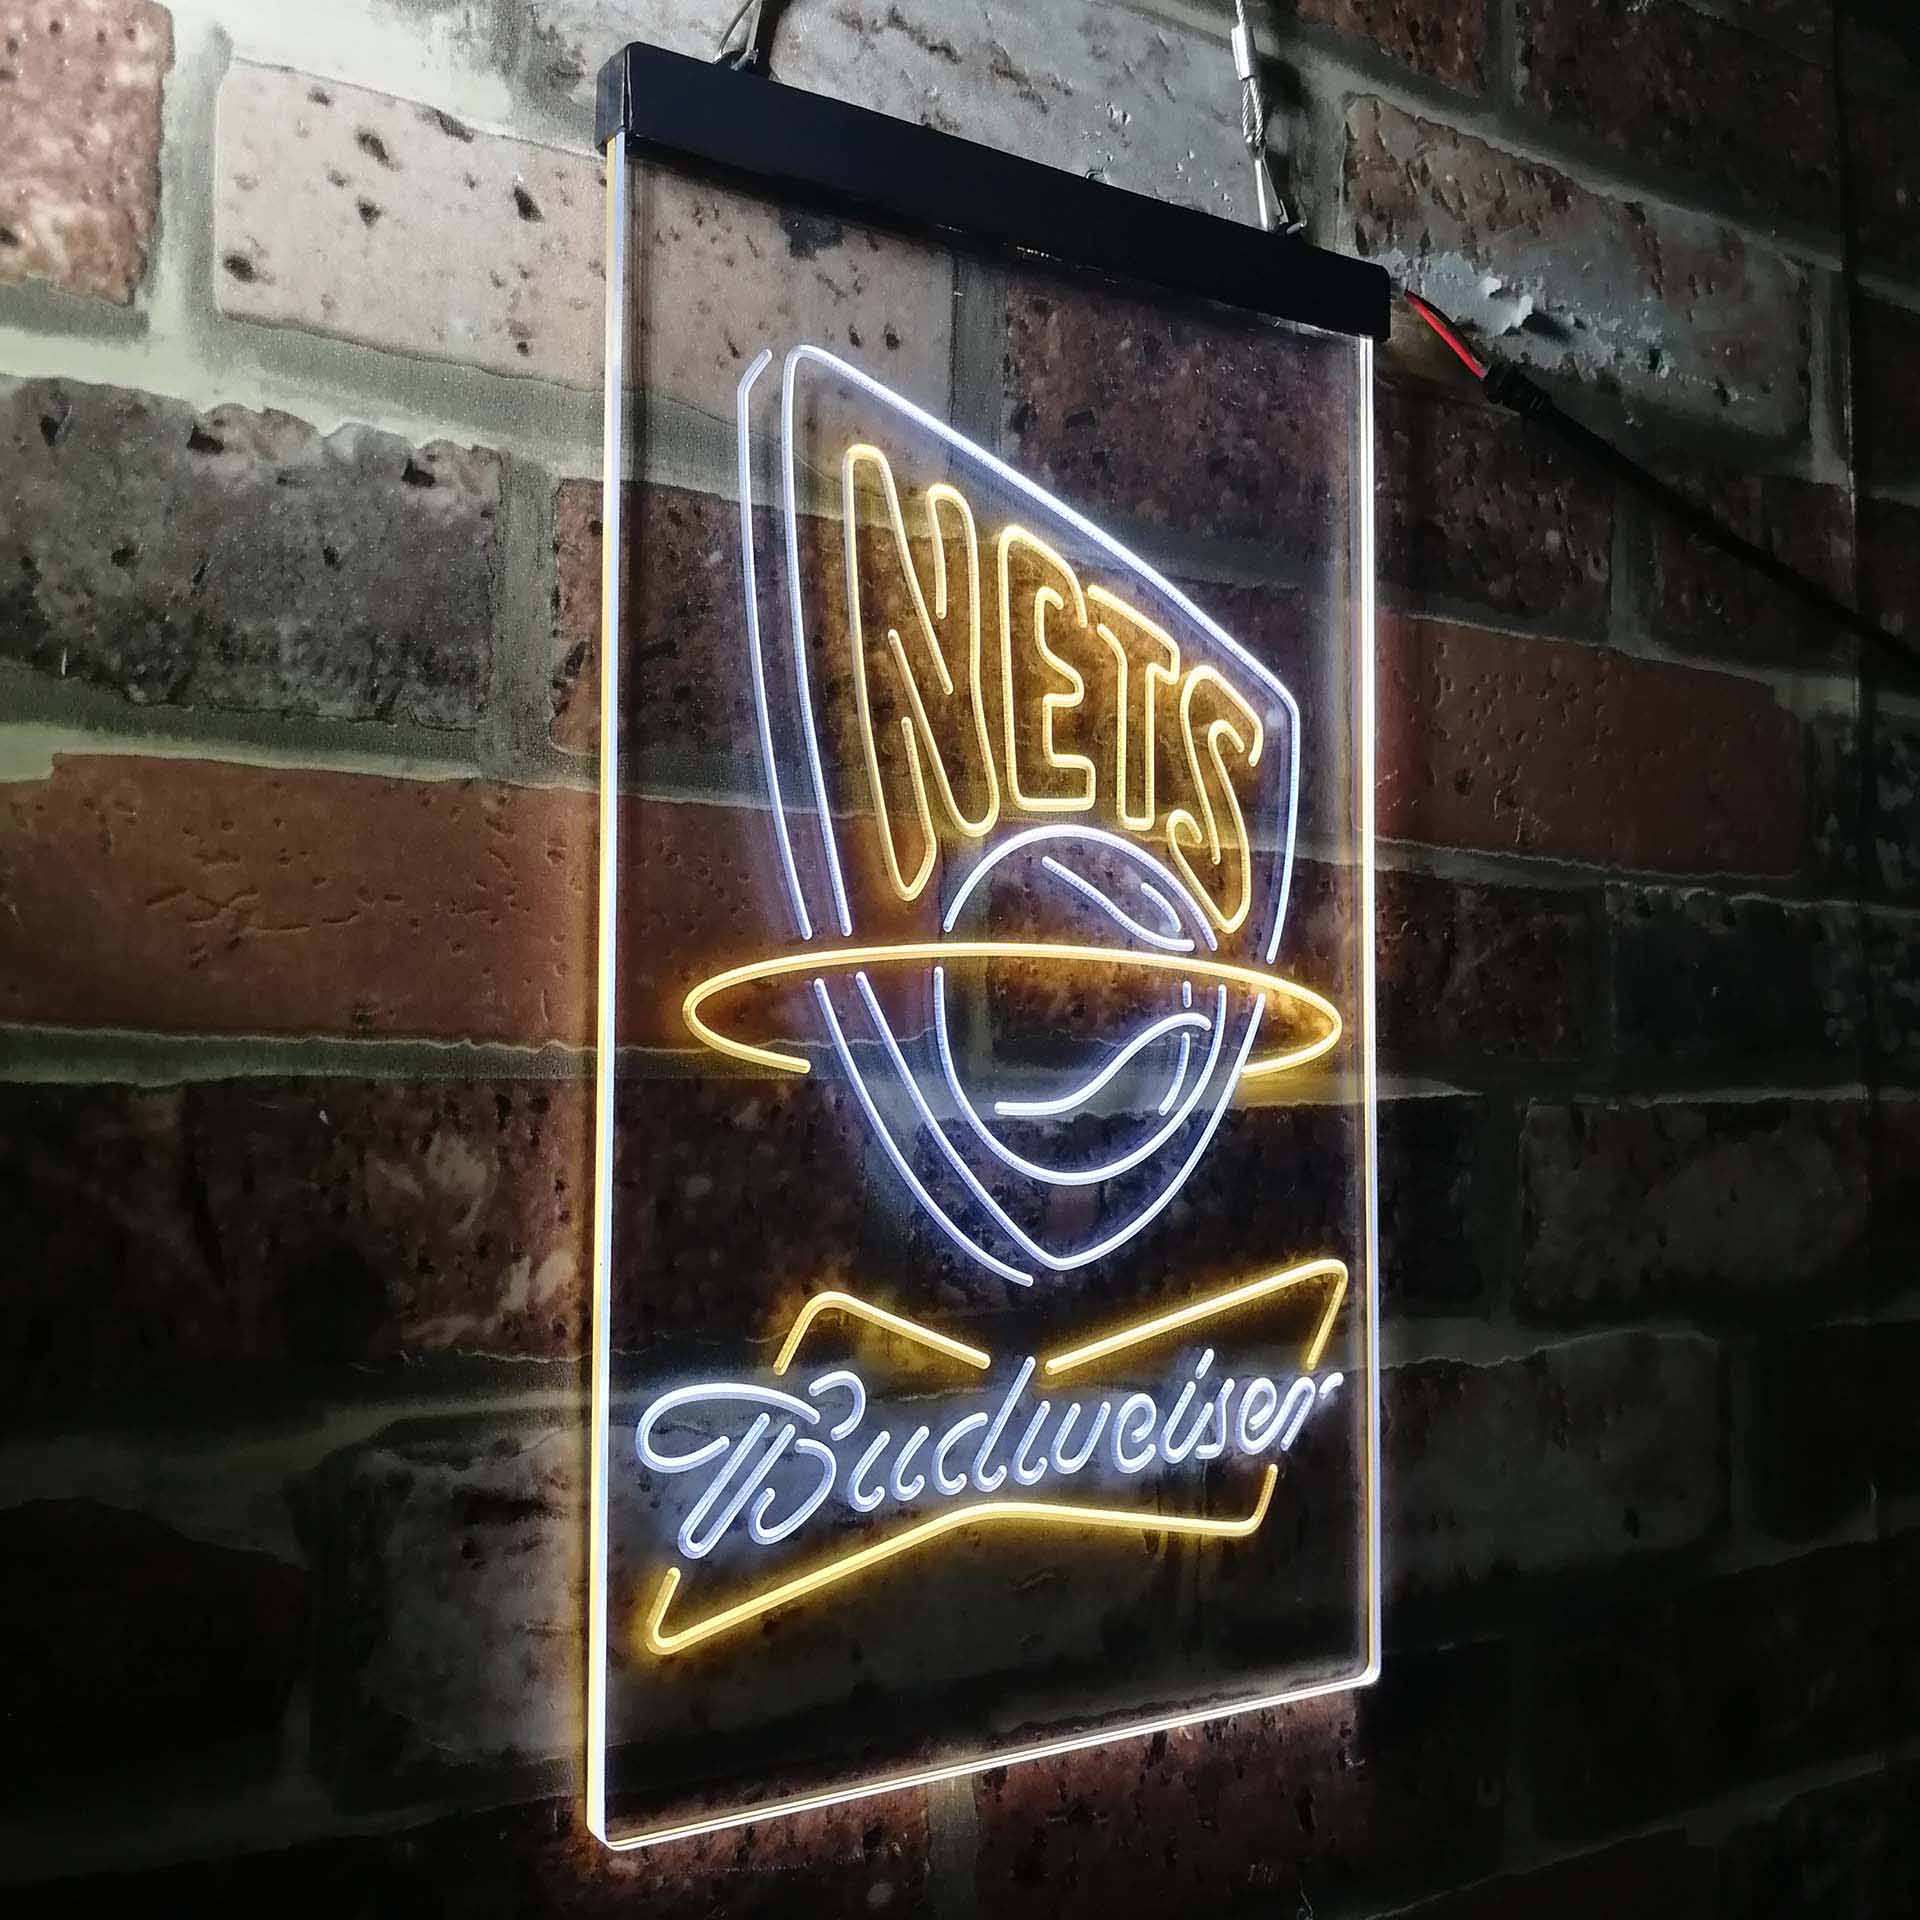 New Jersey Nets Budweiser Neon-Like LED Sign